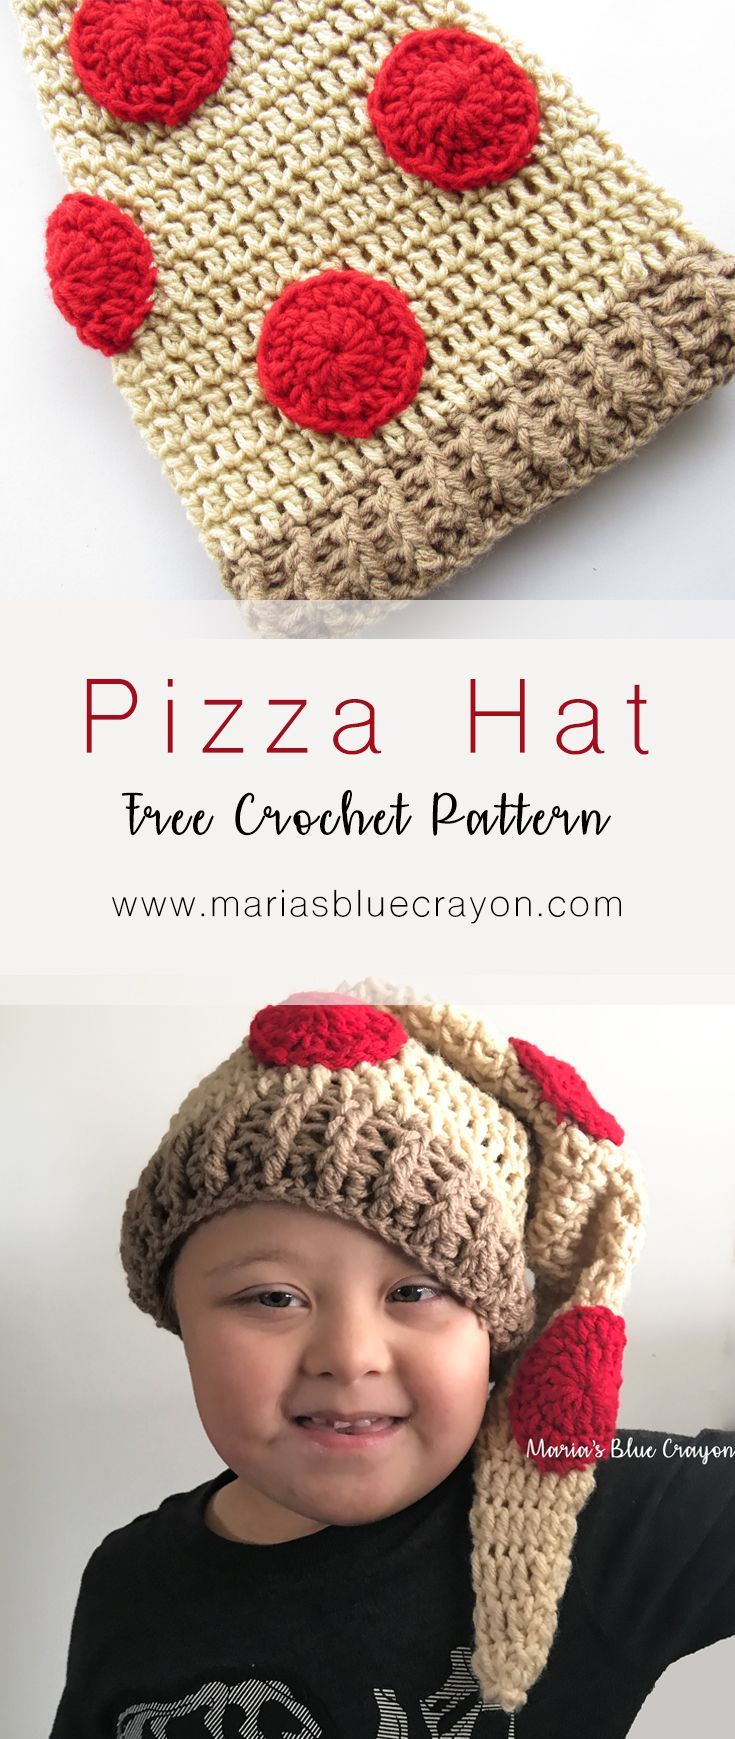 Pizza Hat - Toddler, Child, Adult Sizes - Free Crochet Pattern